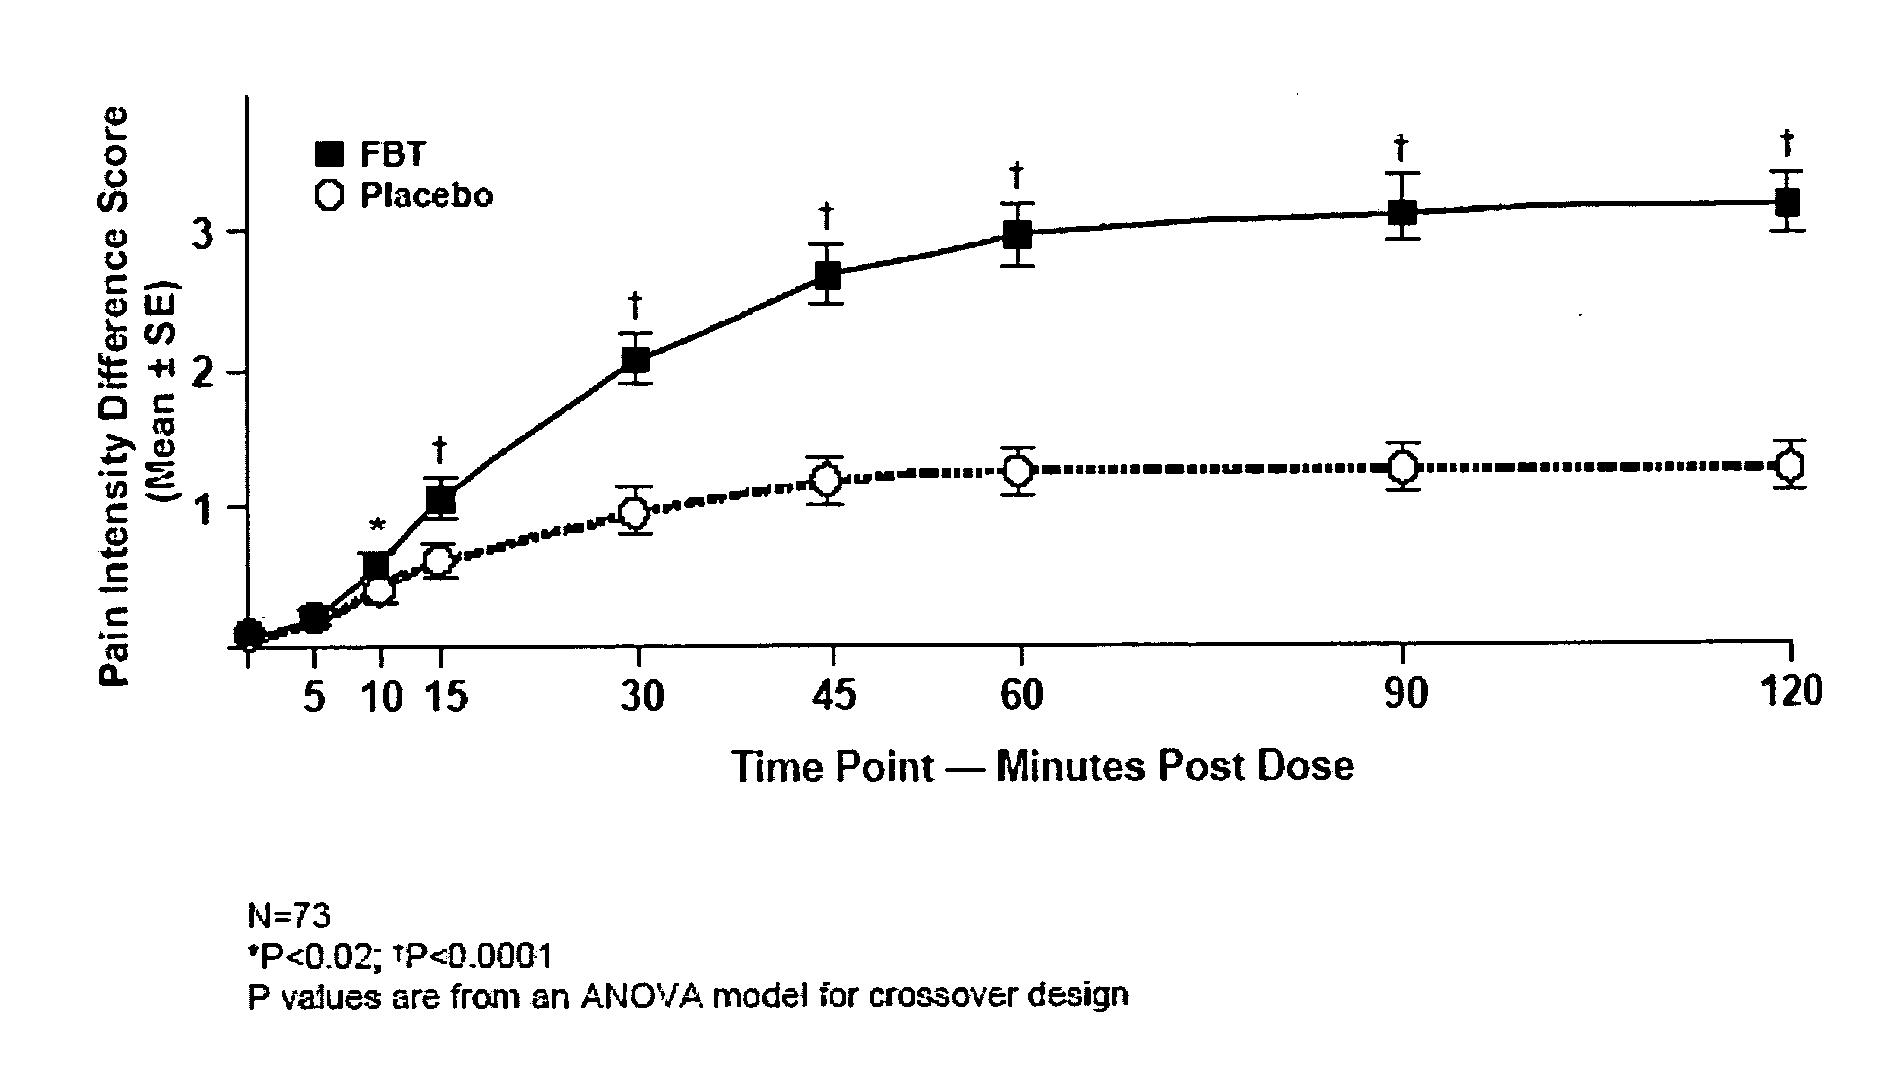 Generally linear effervescent oral fentanyl dosage form and methods of administering